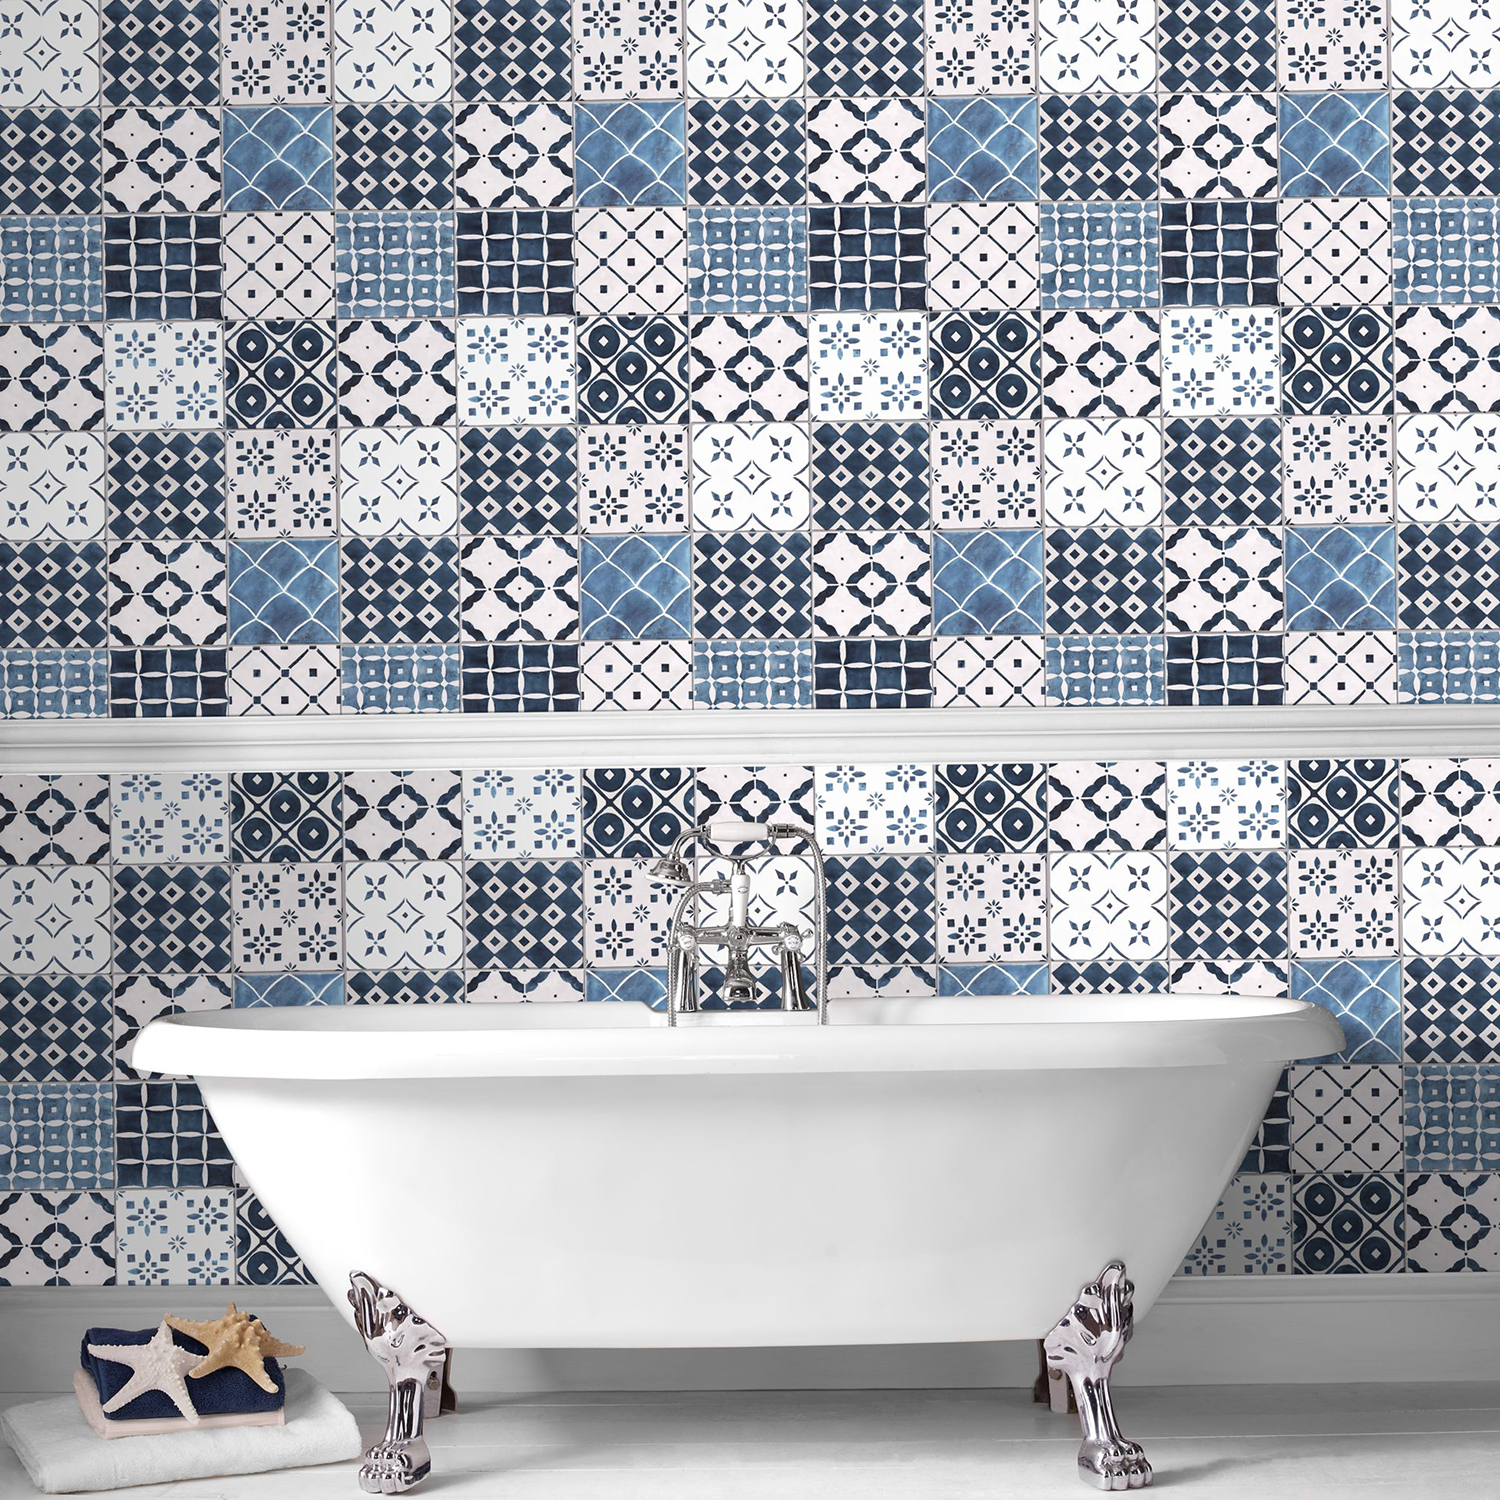 Patterned Wallpaper from Graham and Brown - EG Everton Glass in Liverpool